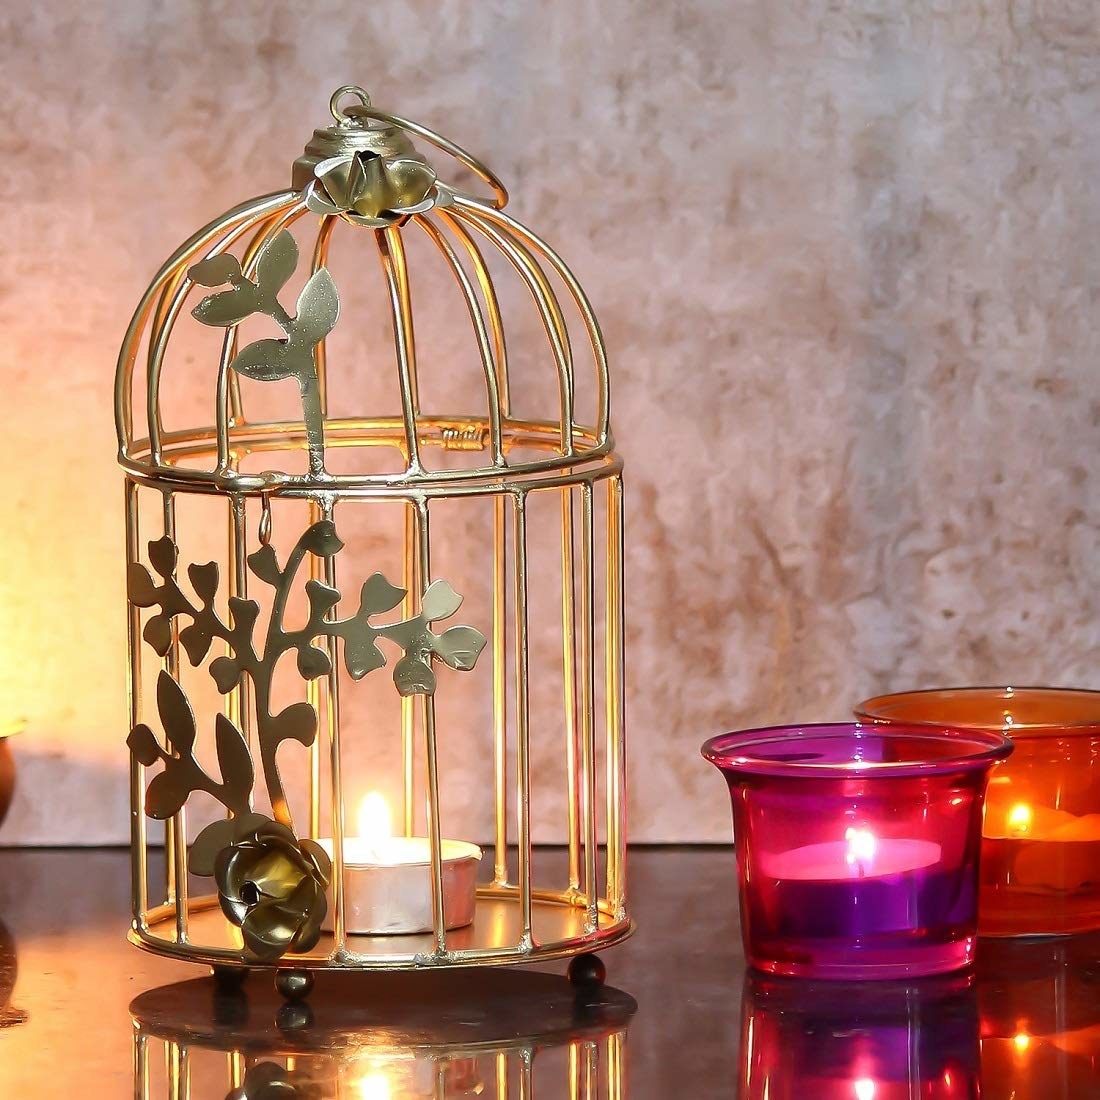 18 Home Decor Items Under ₹500 That Every Home Needs